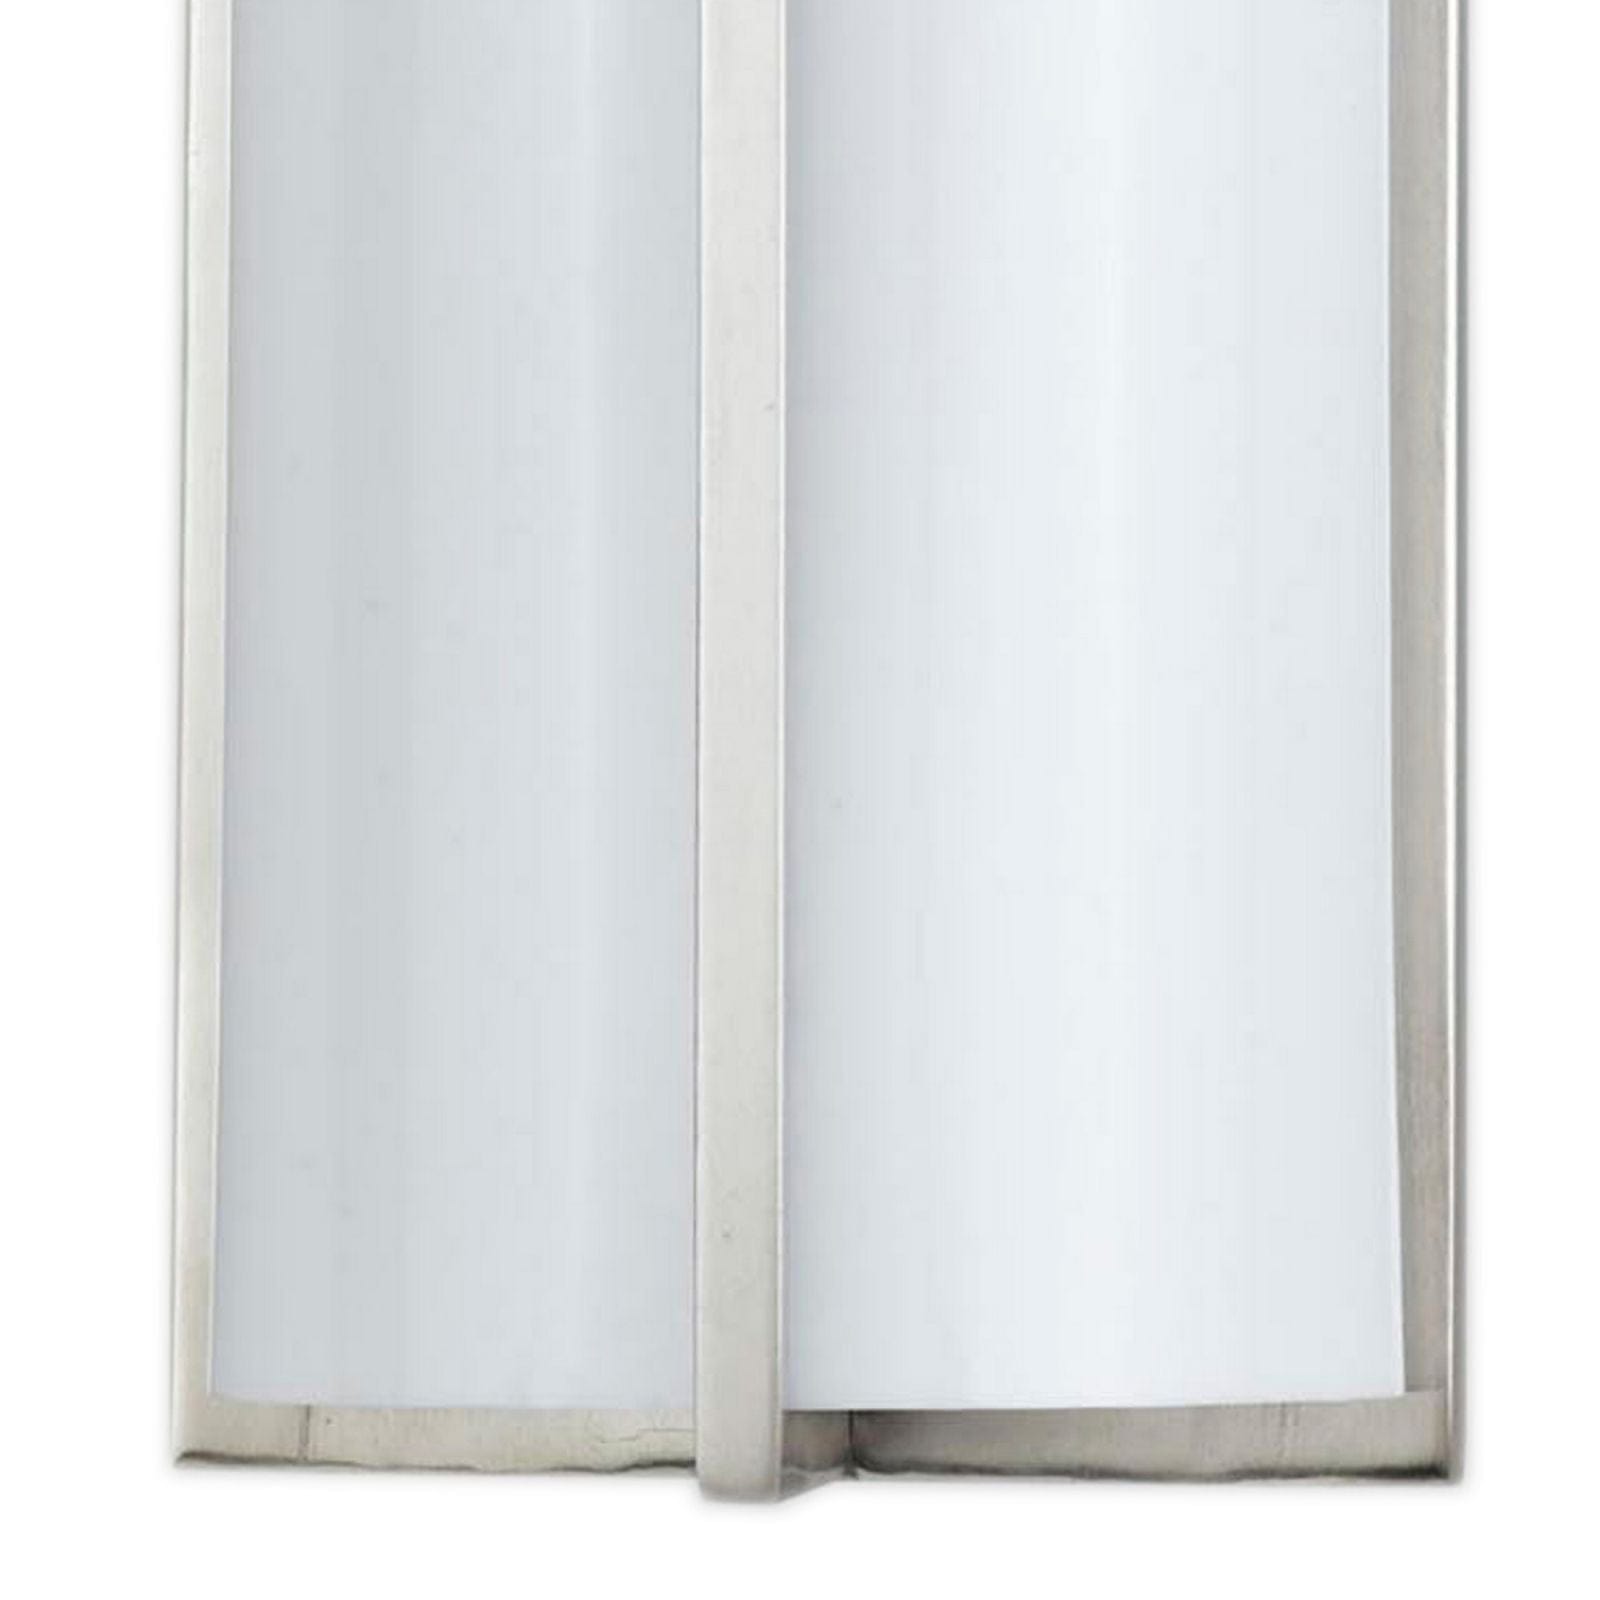 Benzara Cylindrical Shape Plc Wall Lamp With 3D Design, Set Of 4, Silver And White By Benzara Wall Lamps BM220707